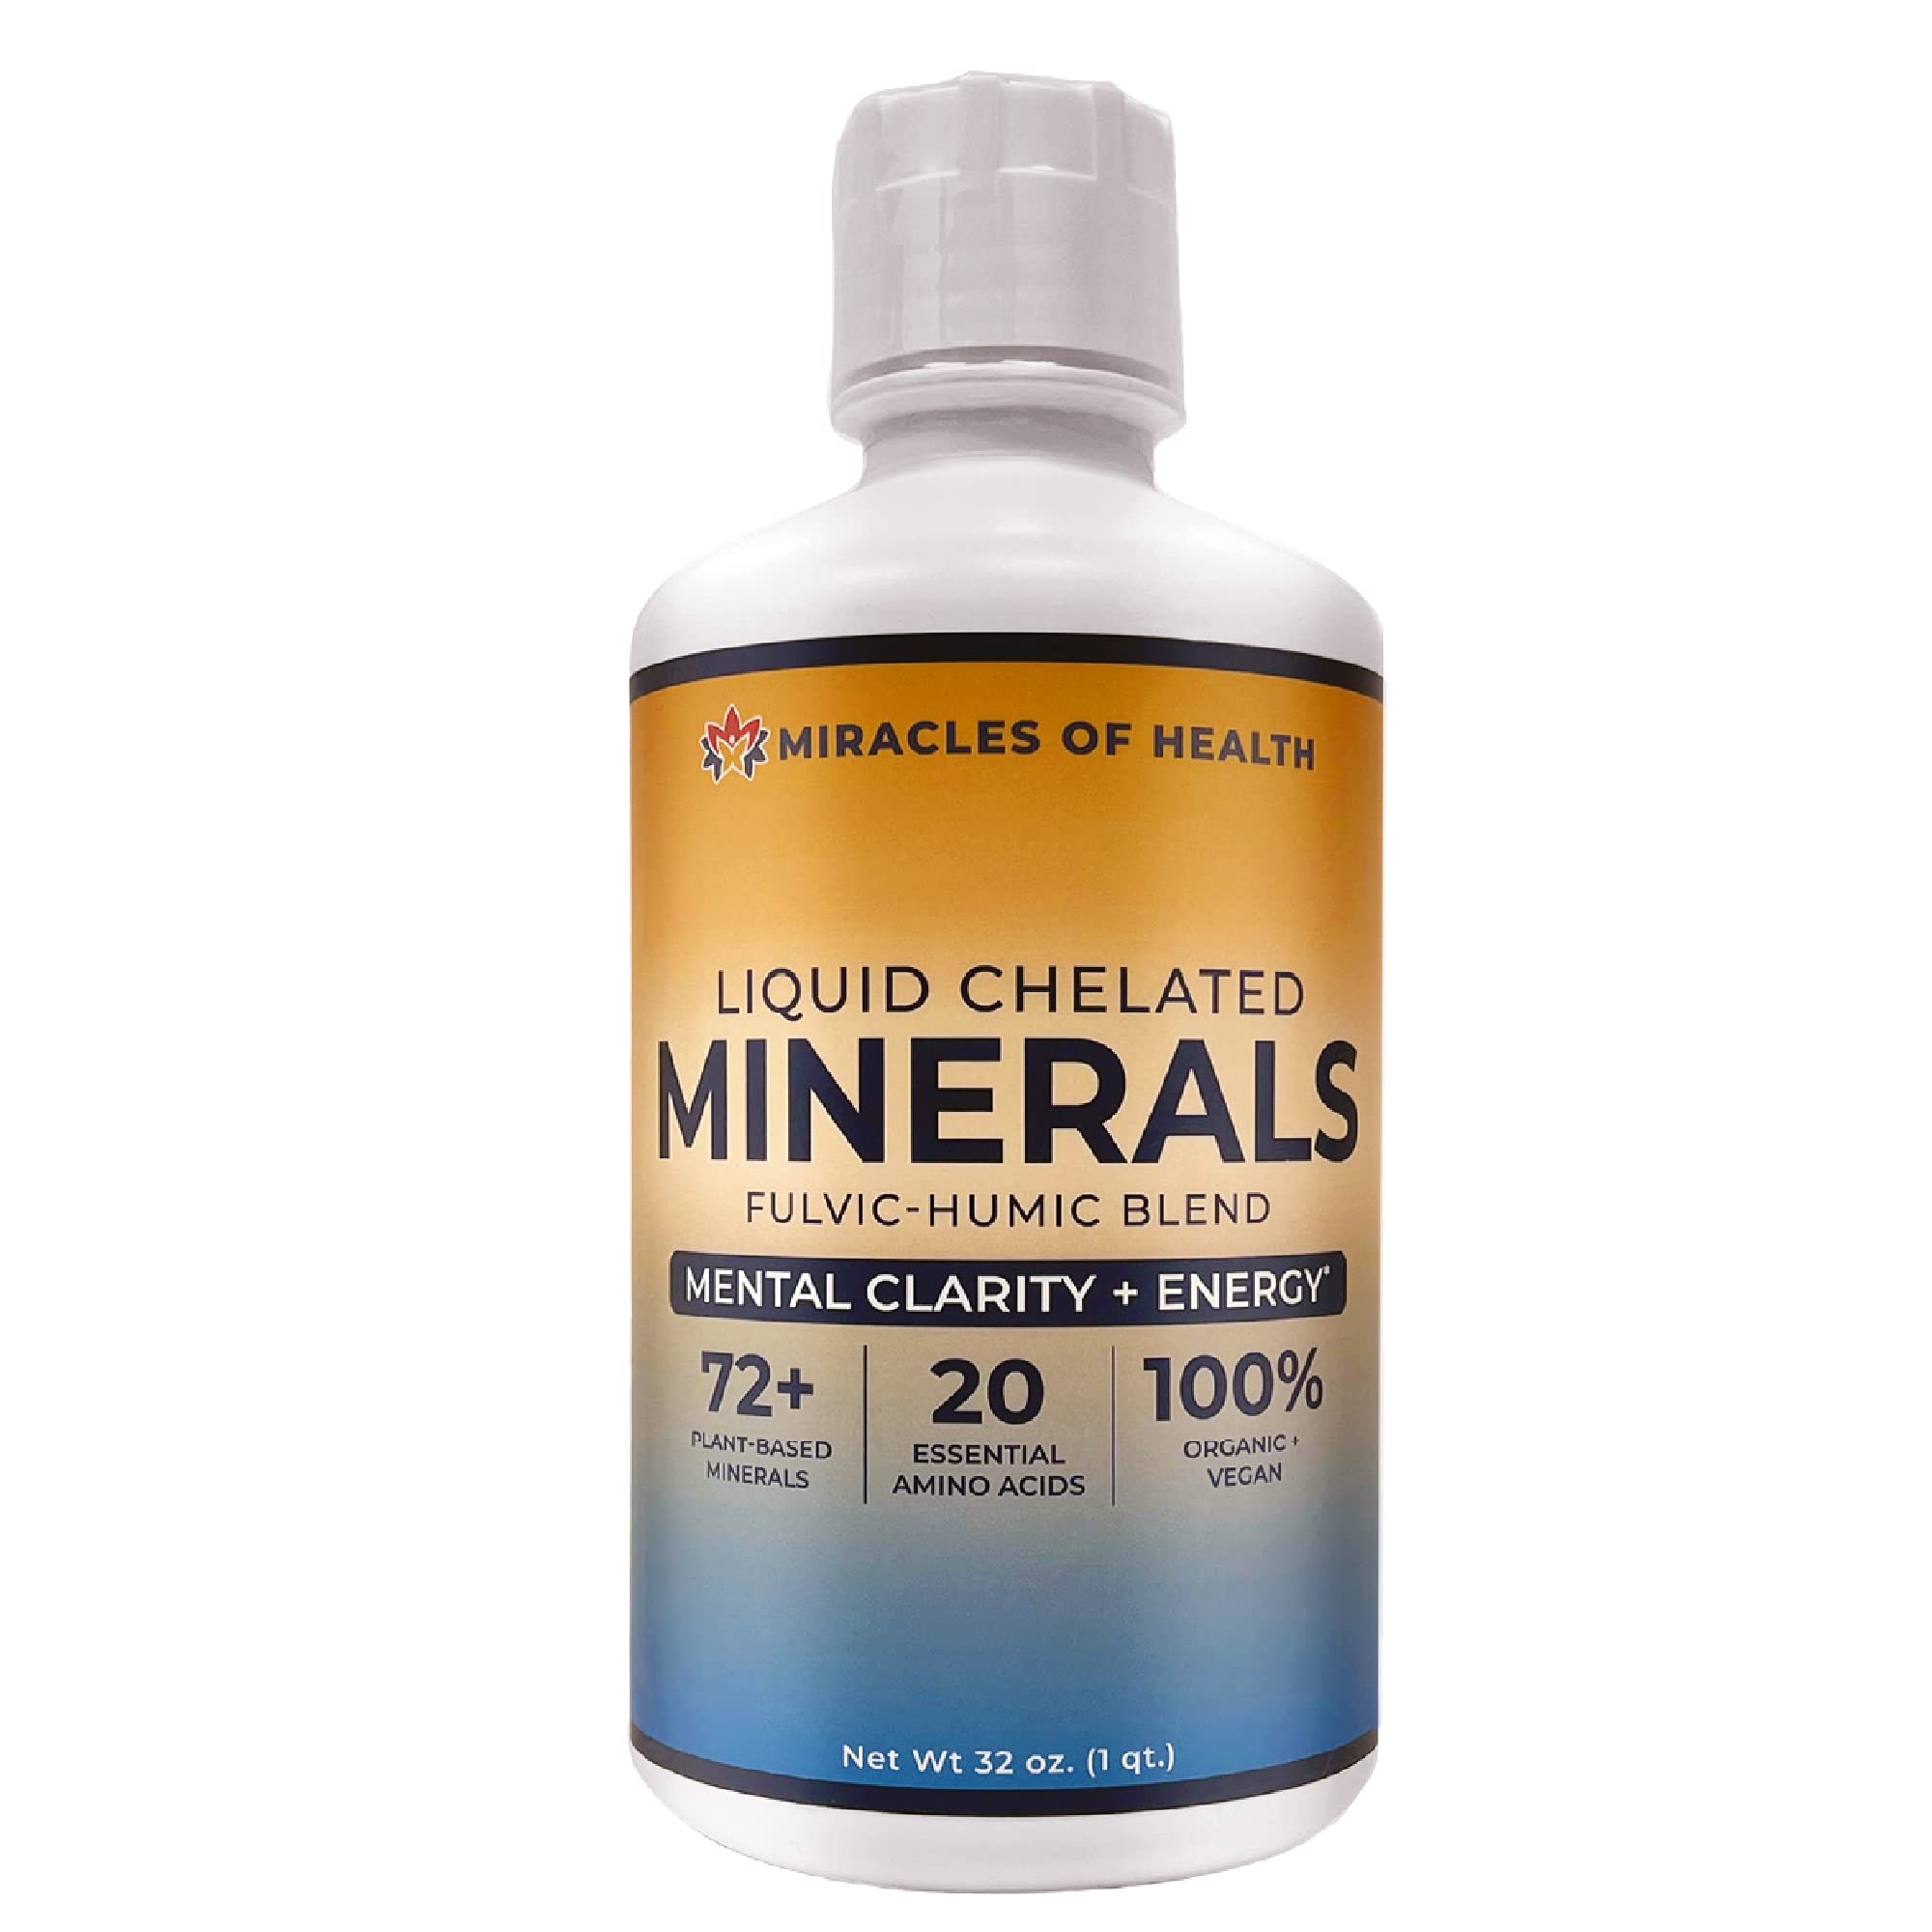 Miracles of Health Liquid Chelated Minerals, 72+ Organic Minerals, 20 Essential Amino Acids | Plant Derived, Humic Fulvic Blend, Essential Major and Minor Trace Minerals | Fast absorption, Energy, Focus | 32 oz bottle - 1 Month Supply